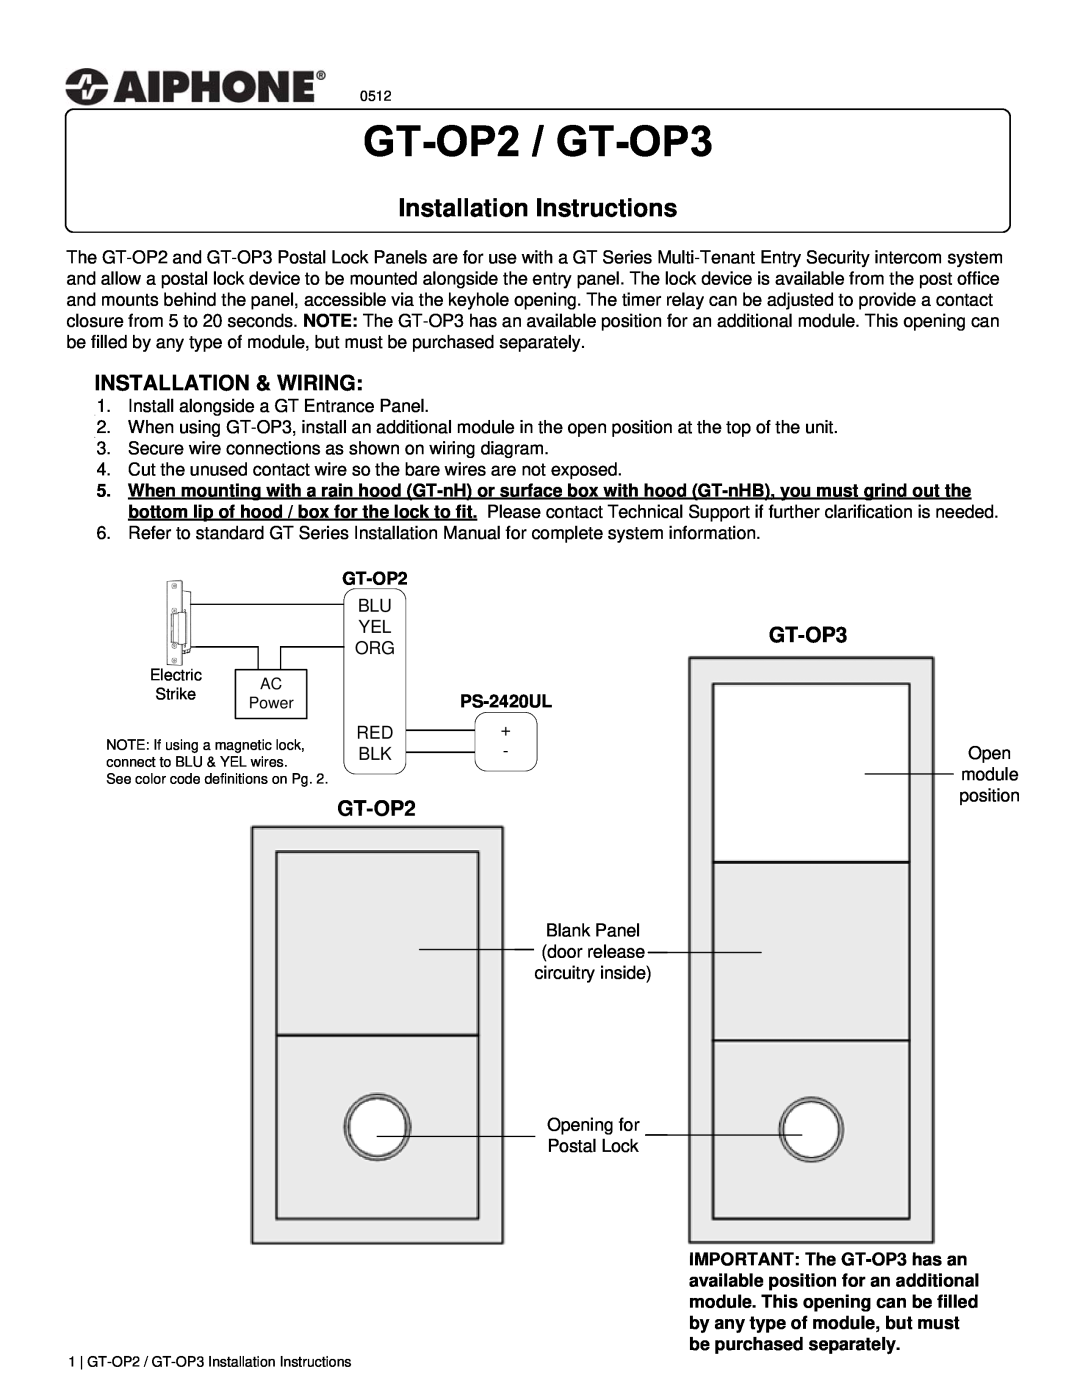 Aiphone gt-op3 installation instructions Installation & Wiring, GT-OP2, GT-OP3, PS-2420UL, Installation Instructions 